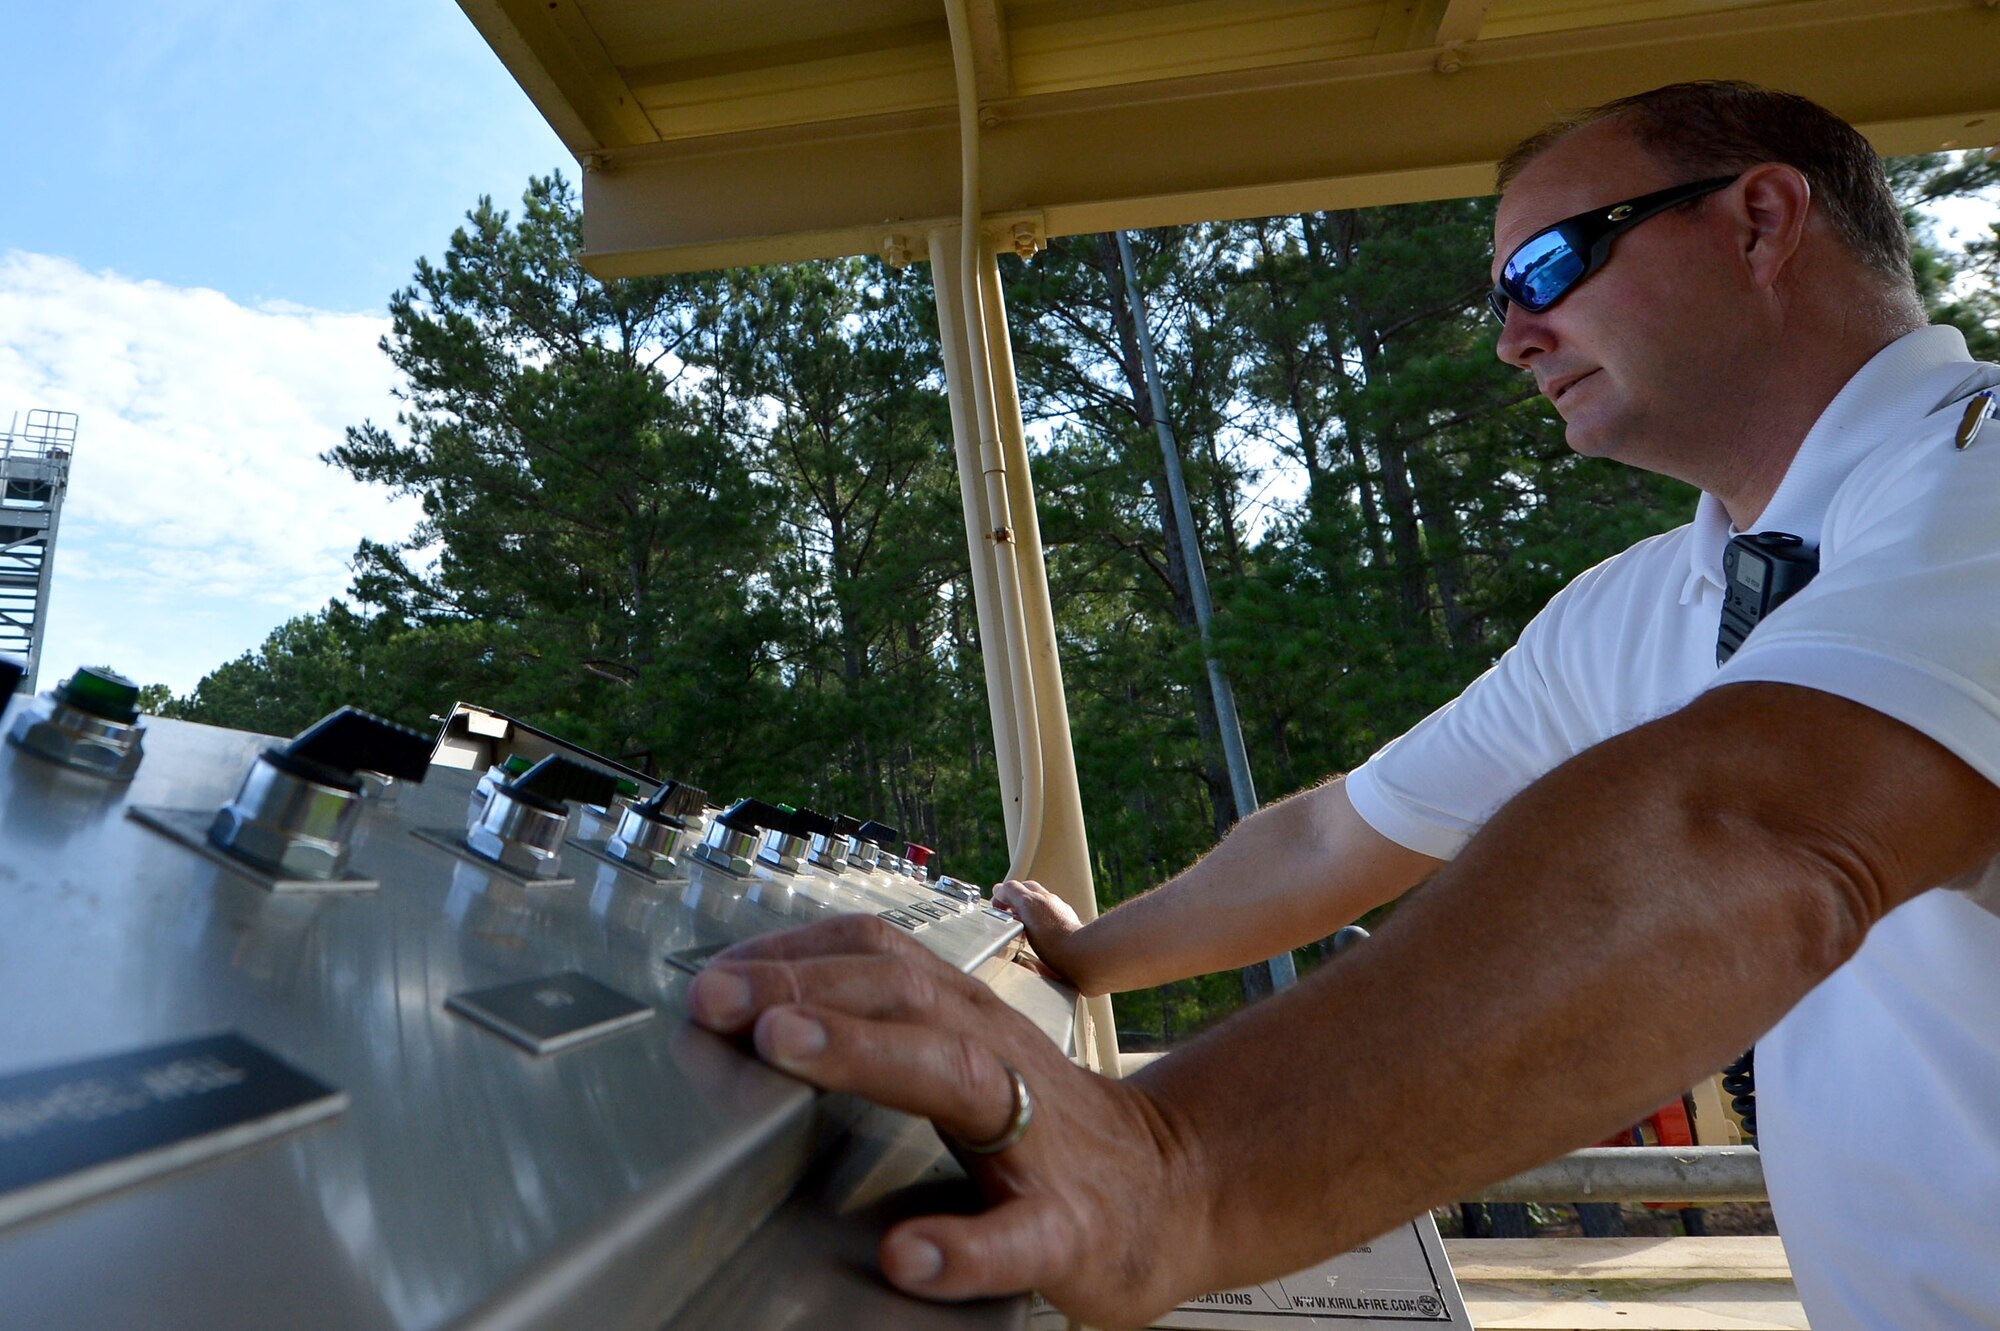 Gregory Farley, 20th Civil Engineer Squadron fire department assistant fire chief, controls the mock C-130 Hercules aircraft fire site lighting mechanism at Shaw Air Force Base, S.C., June 27, 2017. The mechanism controls the locations of the fires on the C-130 by supplying the sparks needed to ignite fumes. (U.S. Air Force photo by Senior Airman Christopher Maldonado)